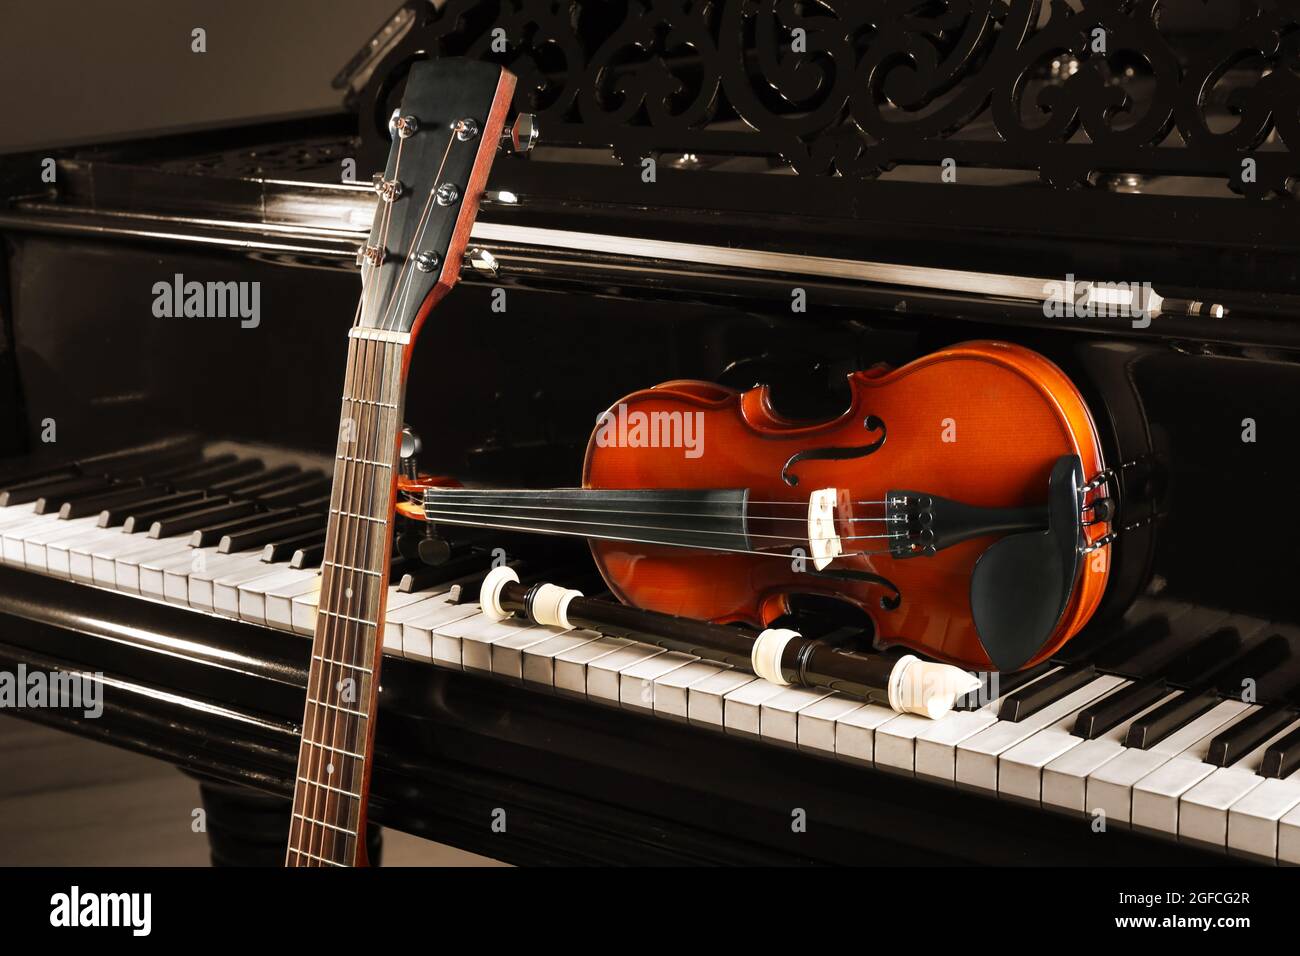 Flute, violin and guitar neck on piano Stock Photo - Alamy